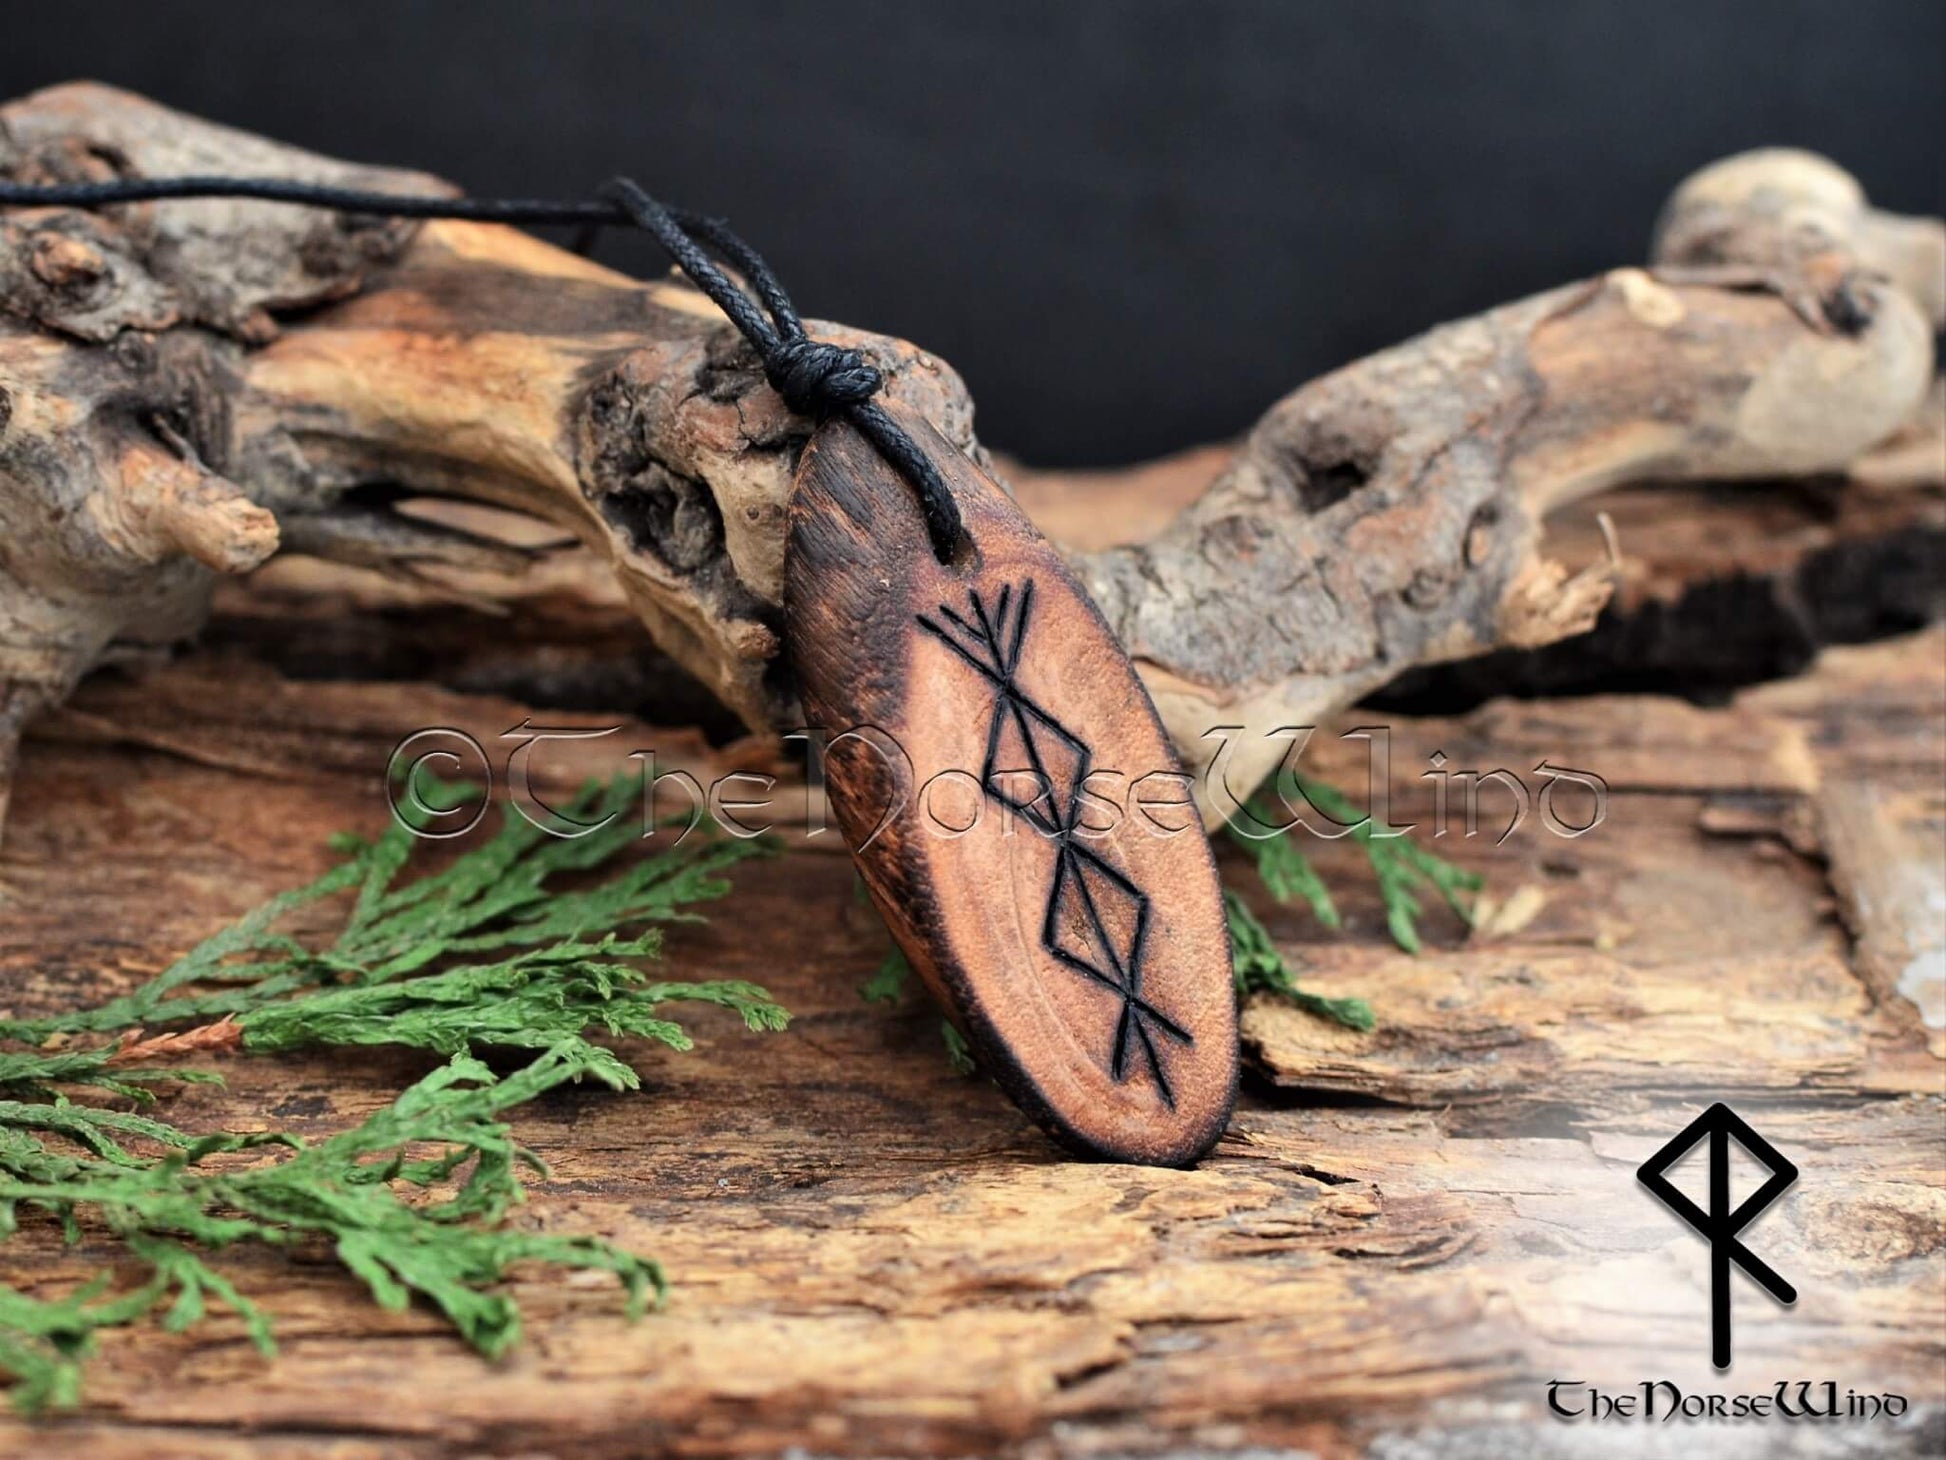 Viking Runes Protection Amulet for Success Prosperity - TheNorseWind